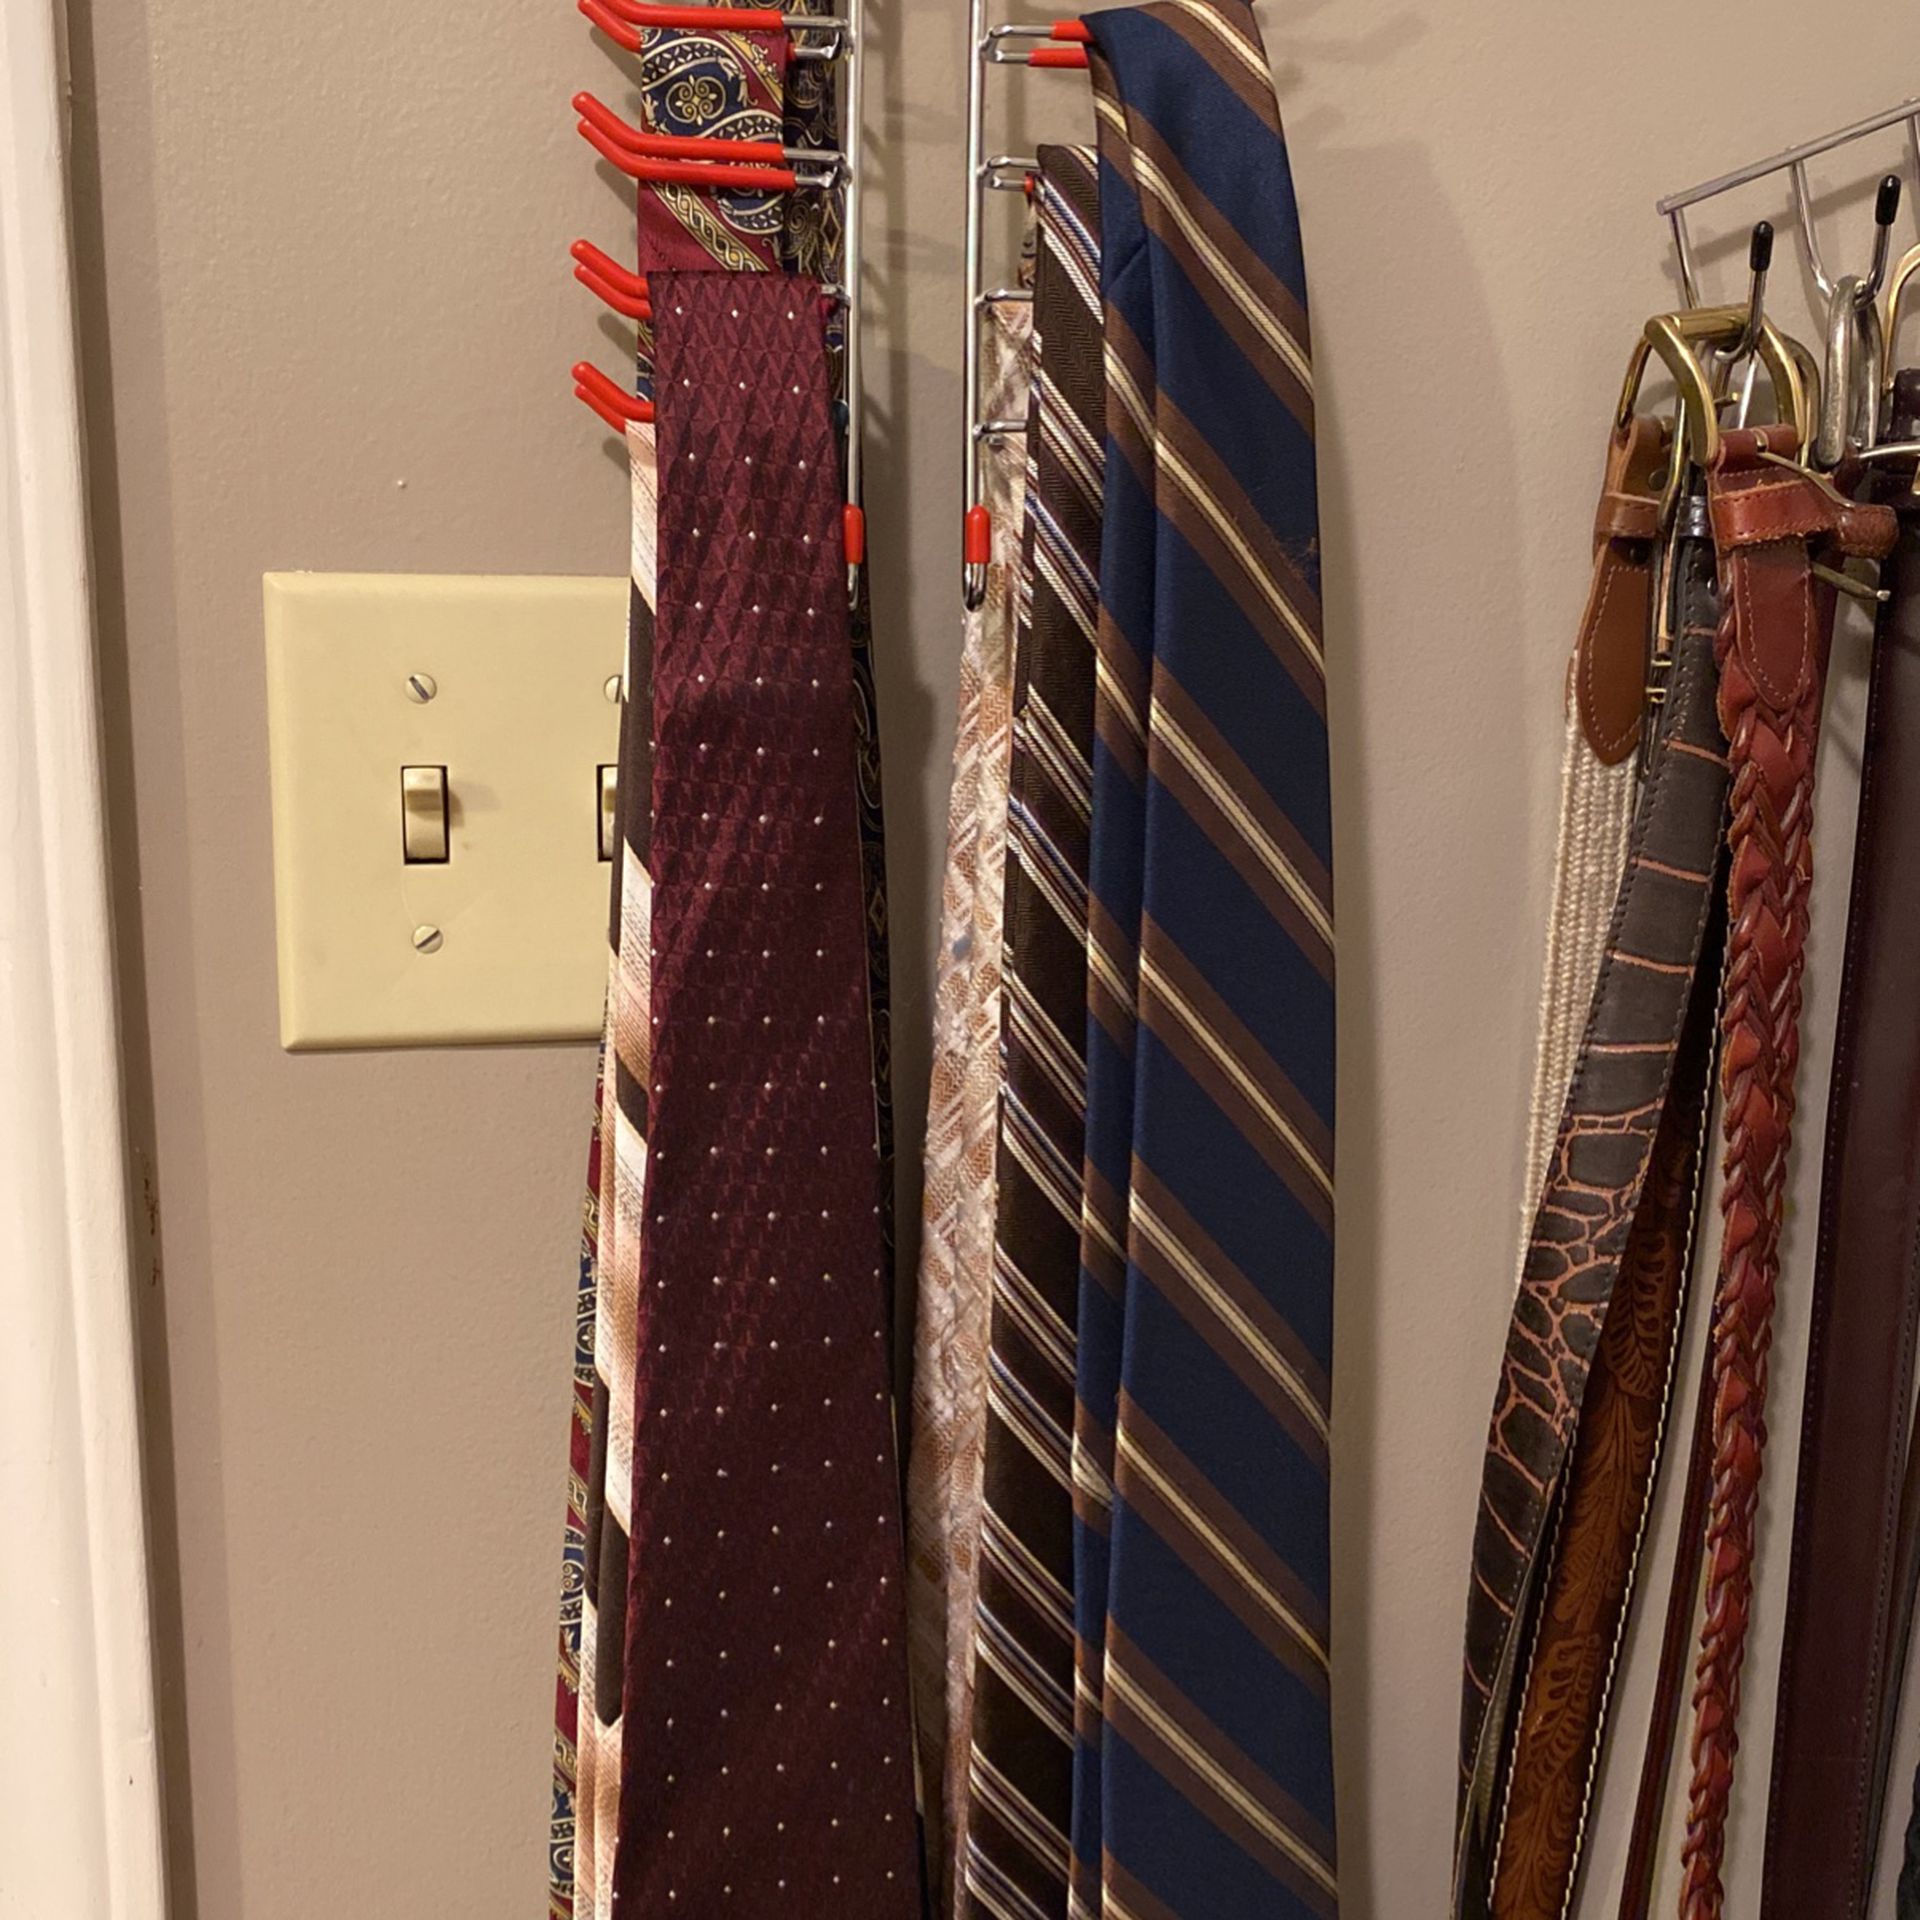 Men’s Tie Collection - Jones NY/Givenchy/Geoffrey Beene/Pavia & More